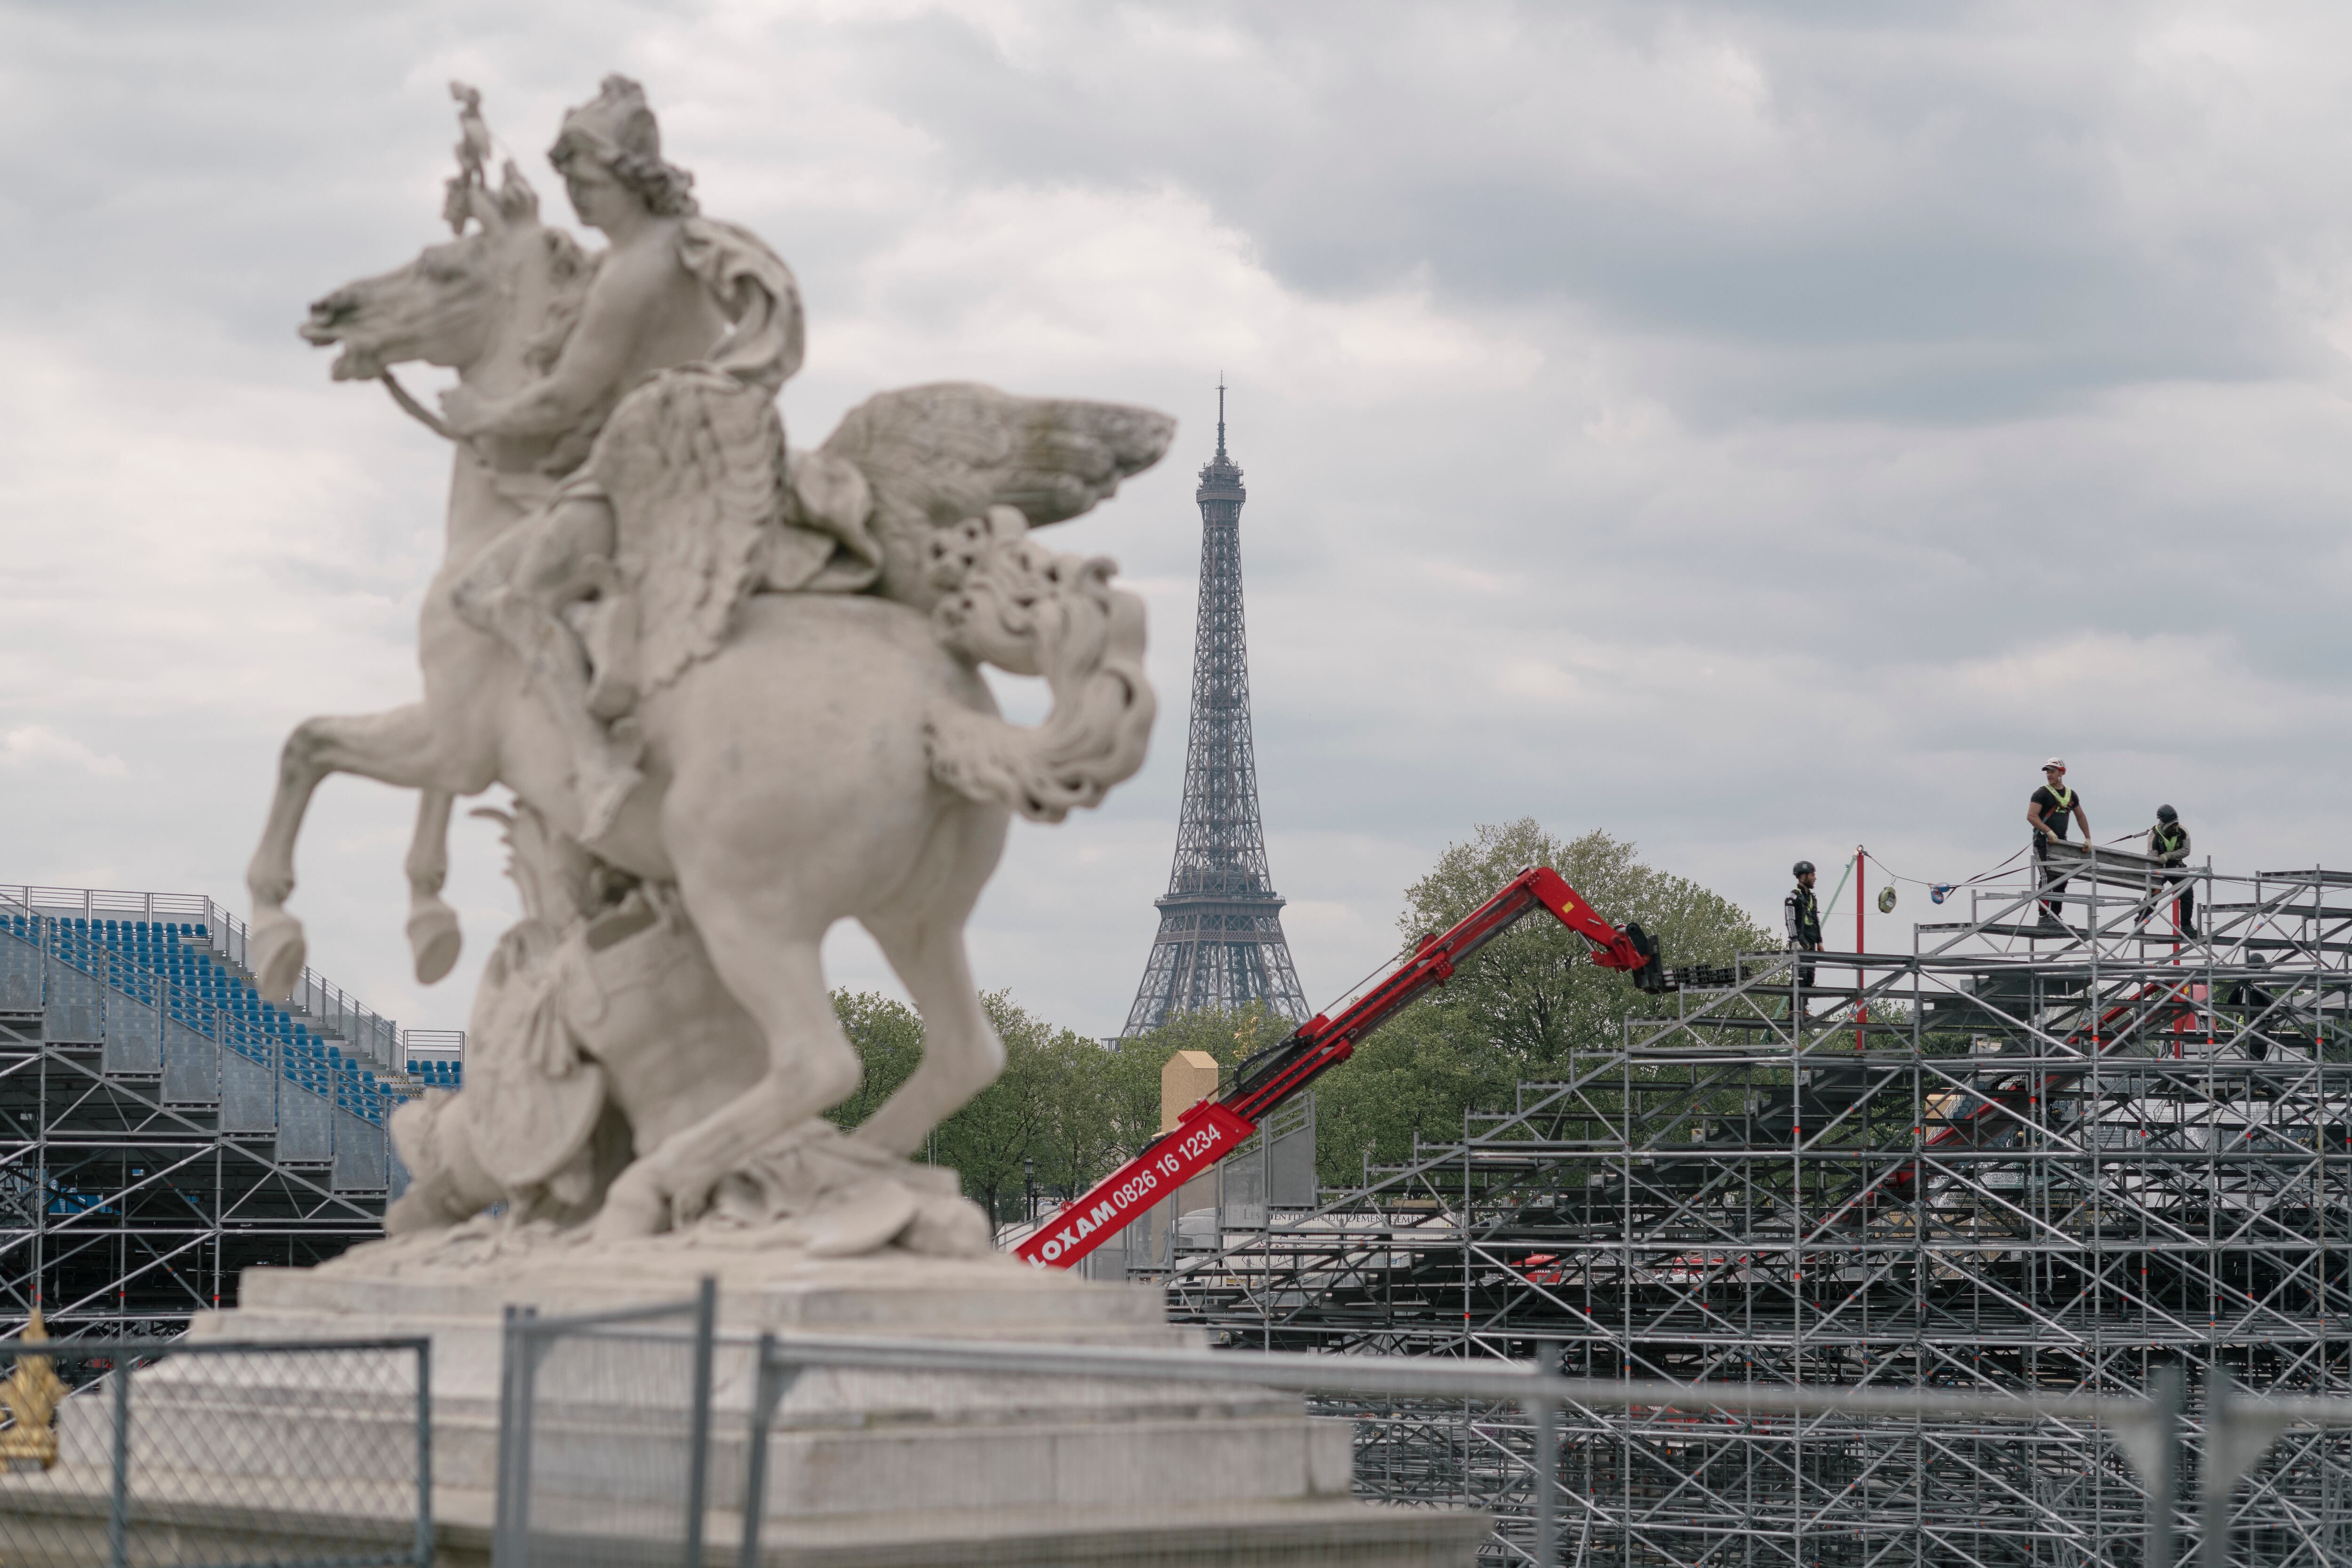 (Dmitry Kostyukov | The New York Times) Workers install temporary bleachers at the Place de la Concorde in Paris, ahead of the Summer Olympics on April 4, 2024.